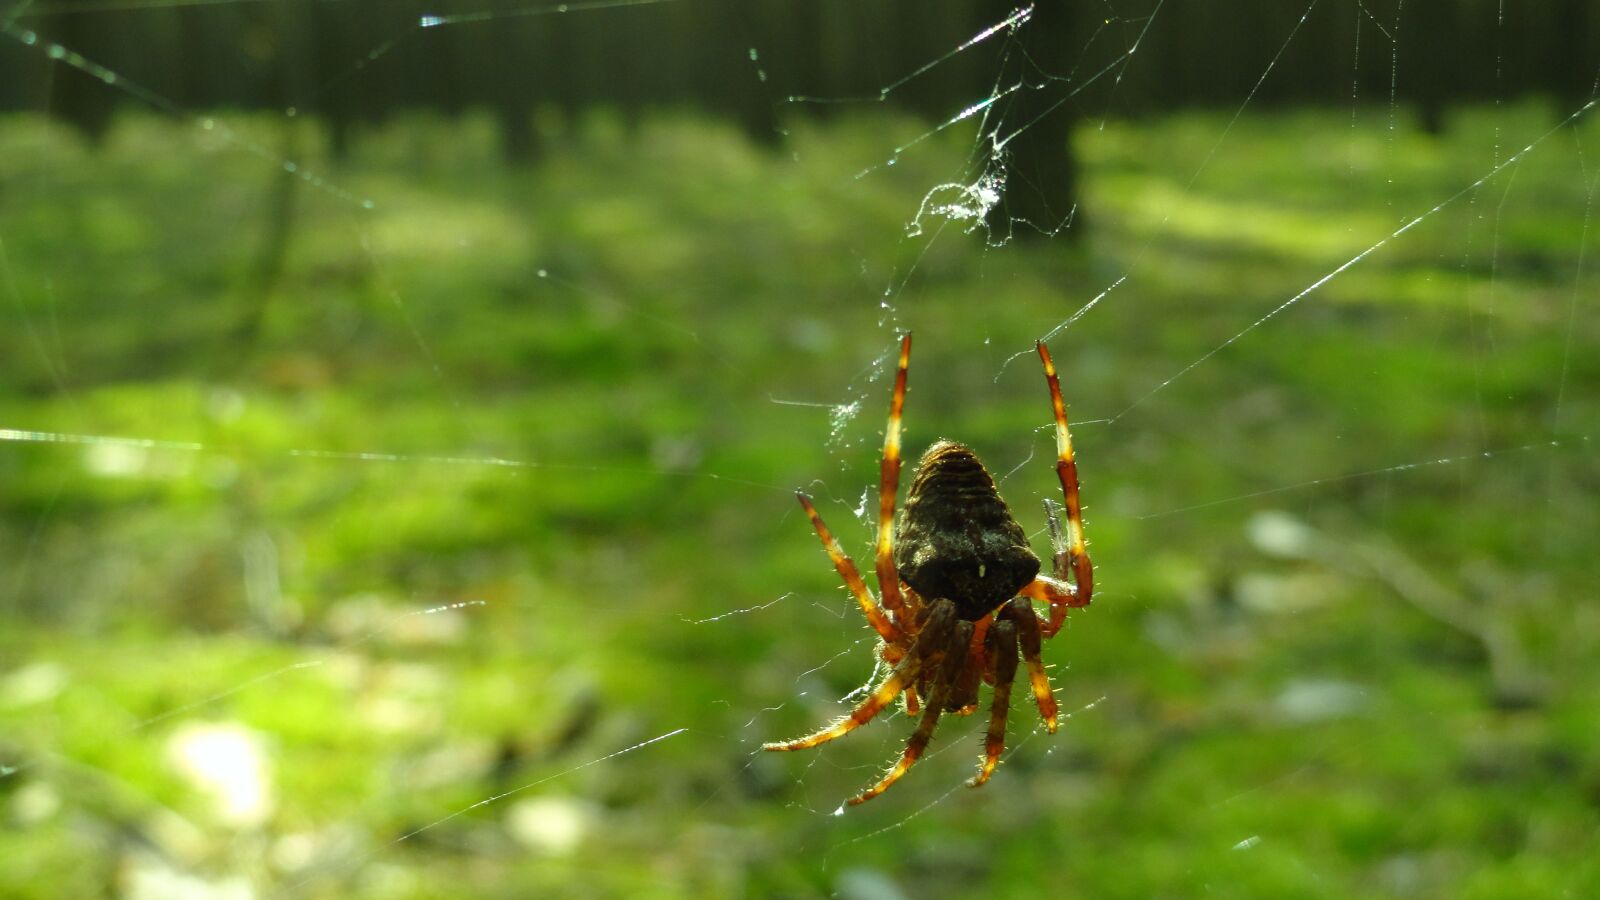 Sony Cyber-shot DSC-H70 sample photo. Spider, forest, nature photography